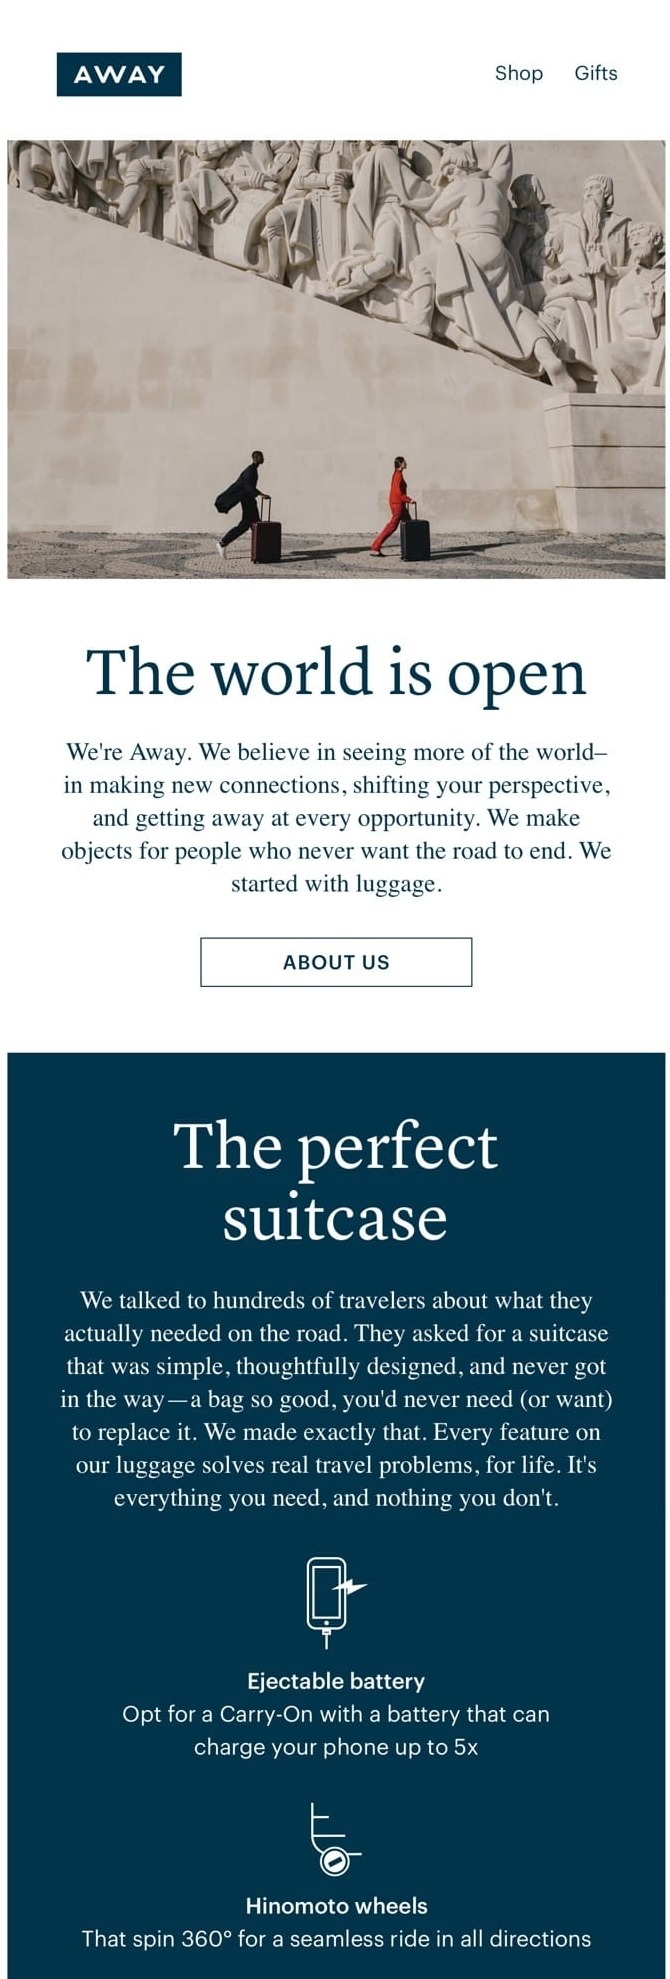 Welcome email design ideas